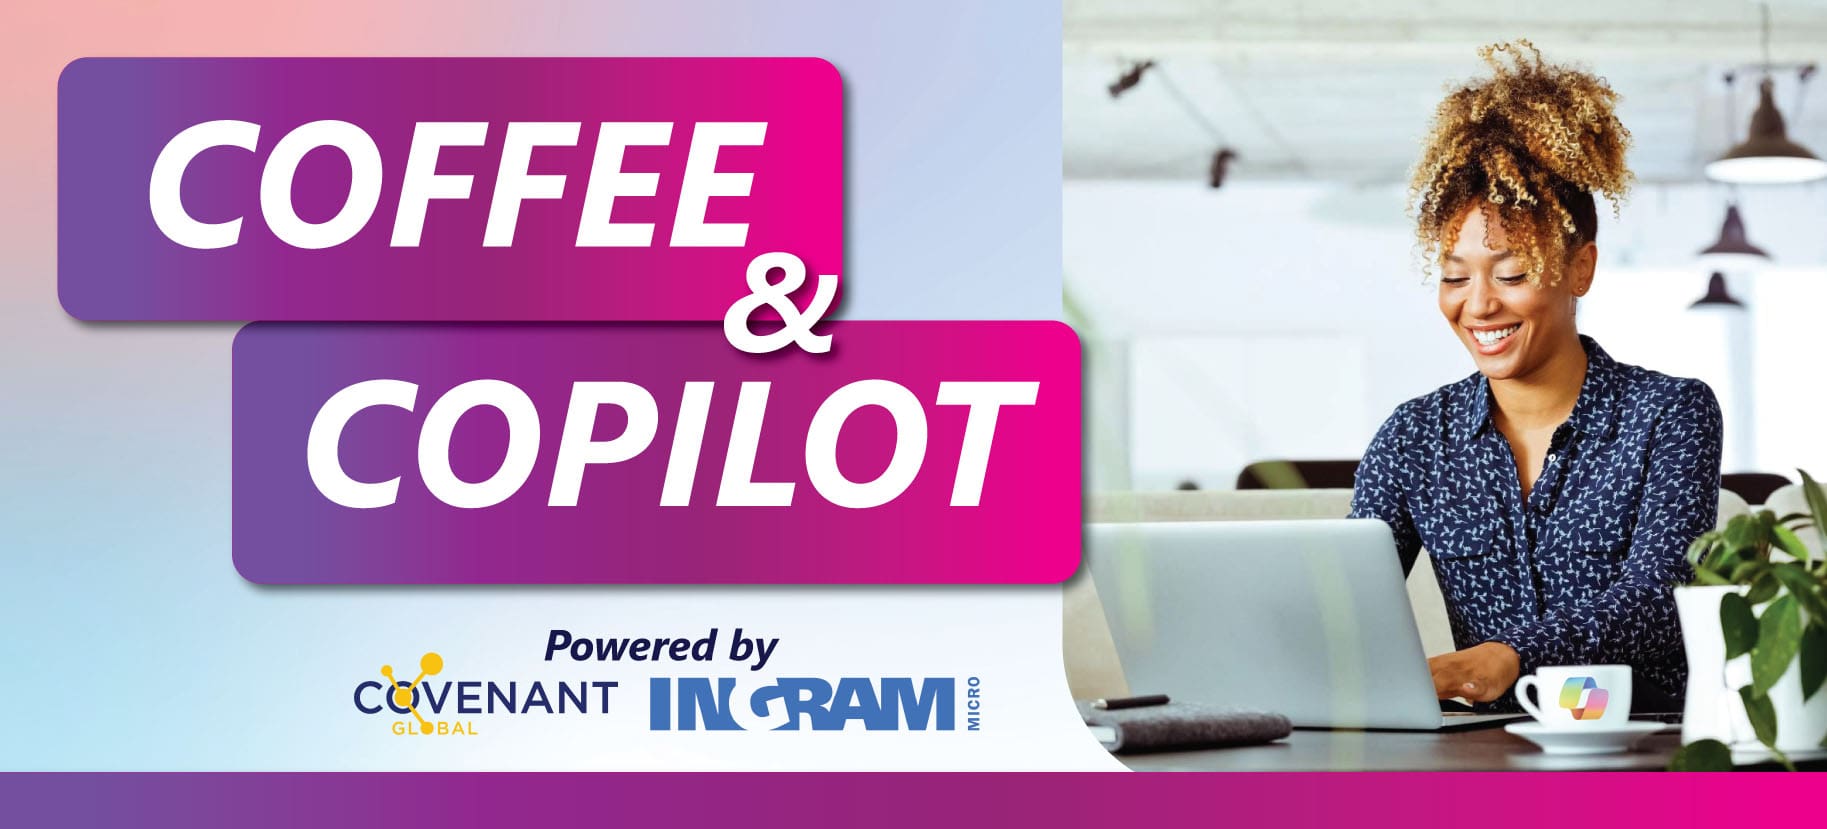 Coffee & Copilot event, powered by Covenant Global and Ingram Micro